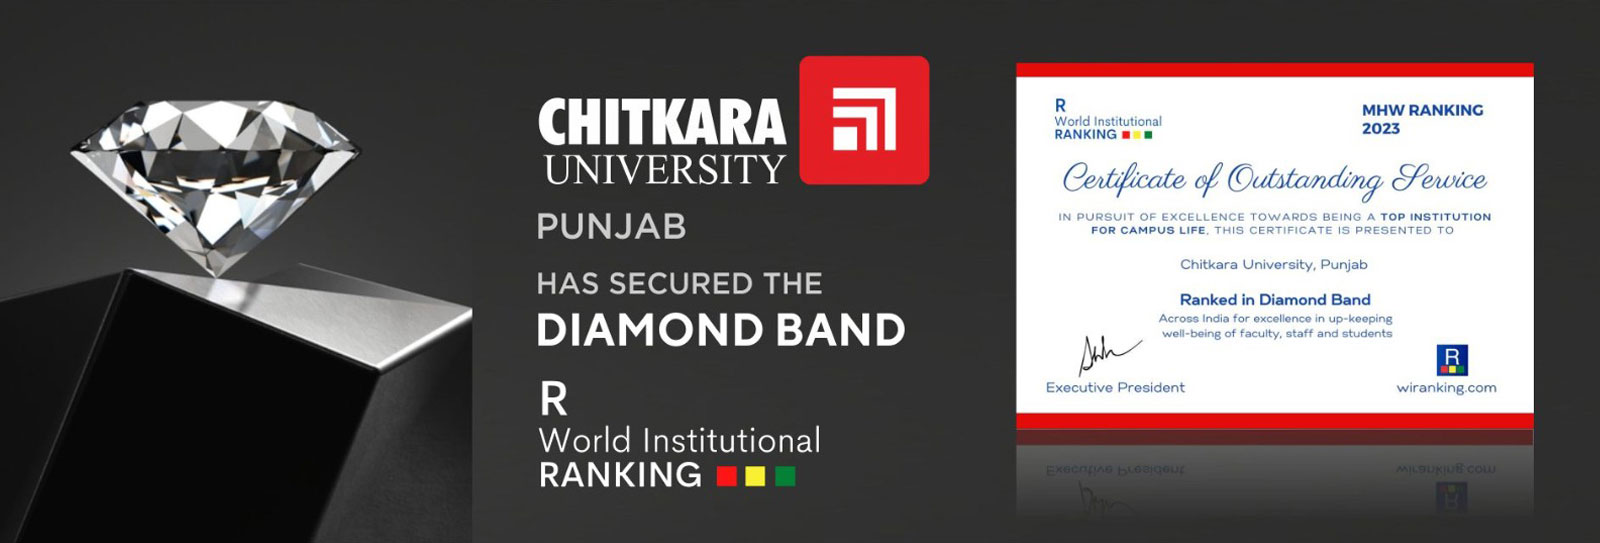 Mental Health and Well-Being Ranking - Chitkara university